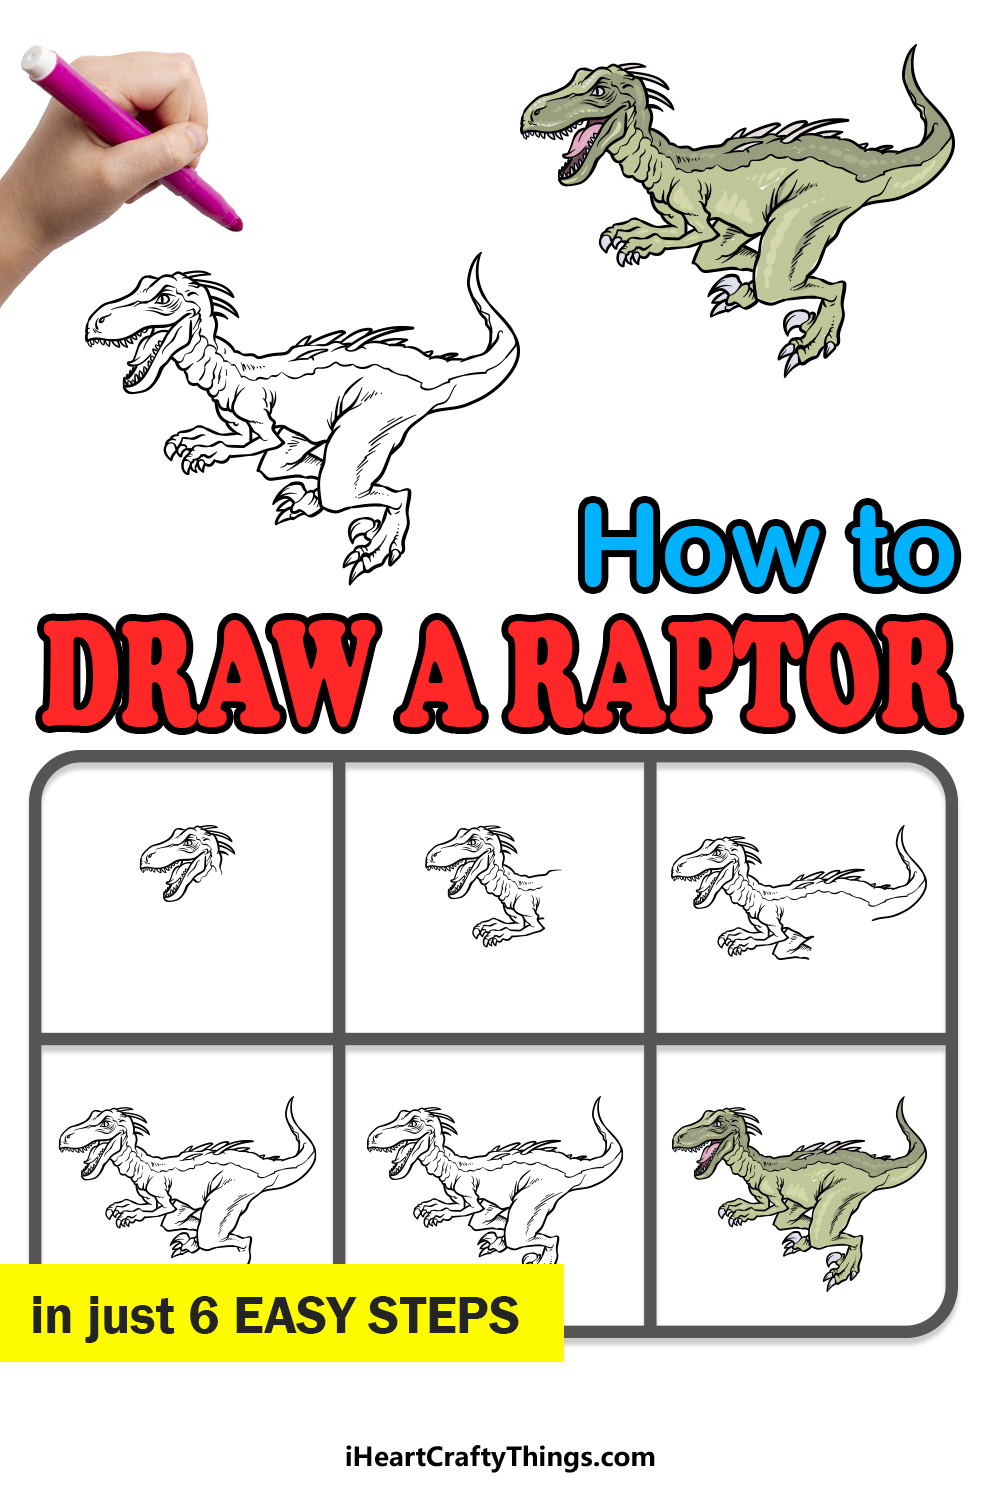 how to draw a Raptor in 6 easy steps